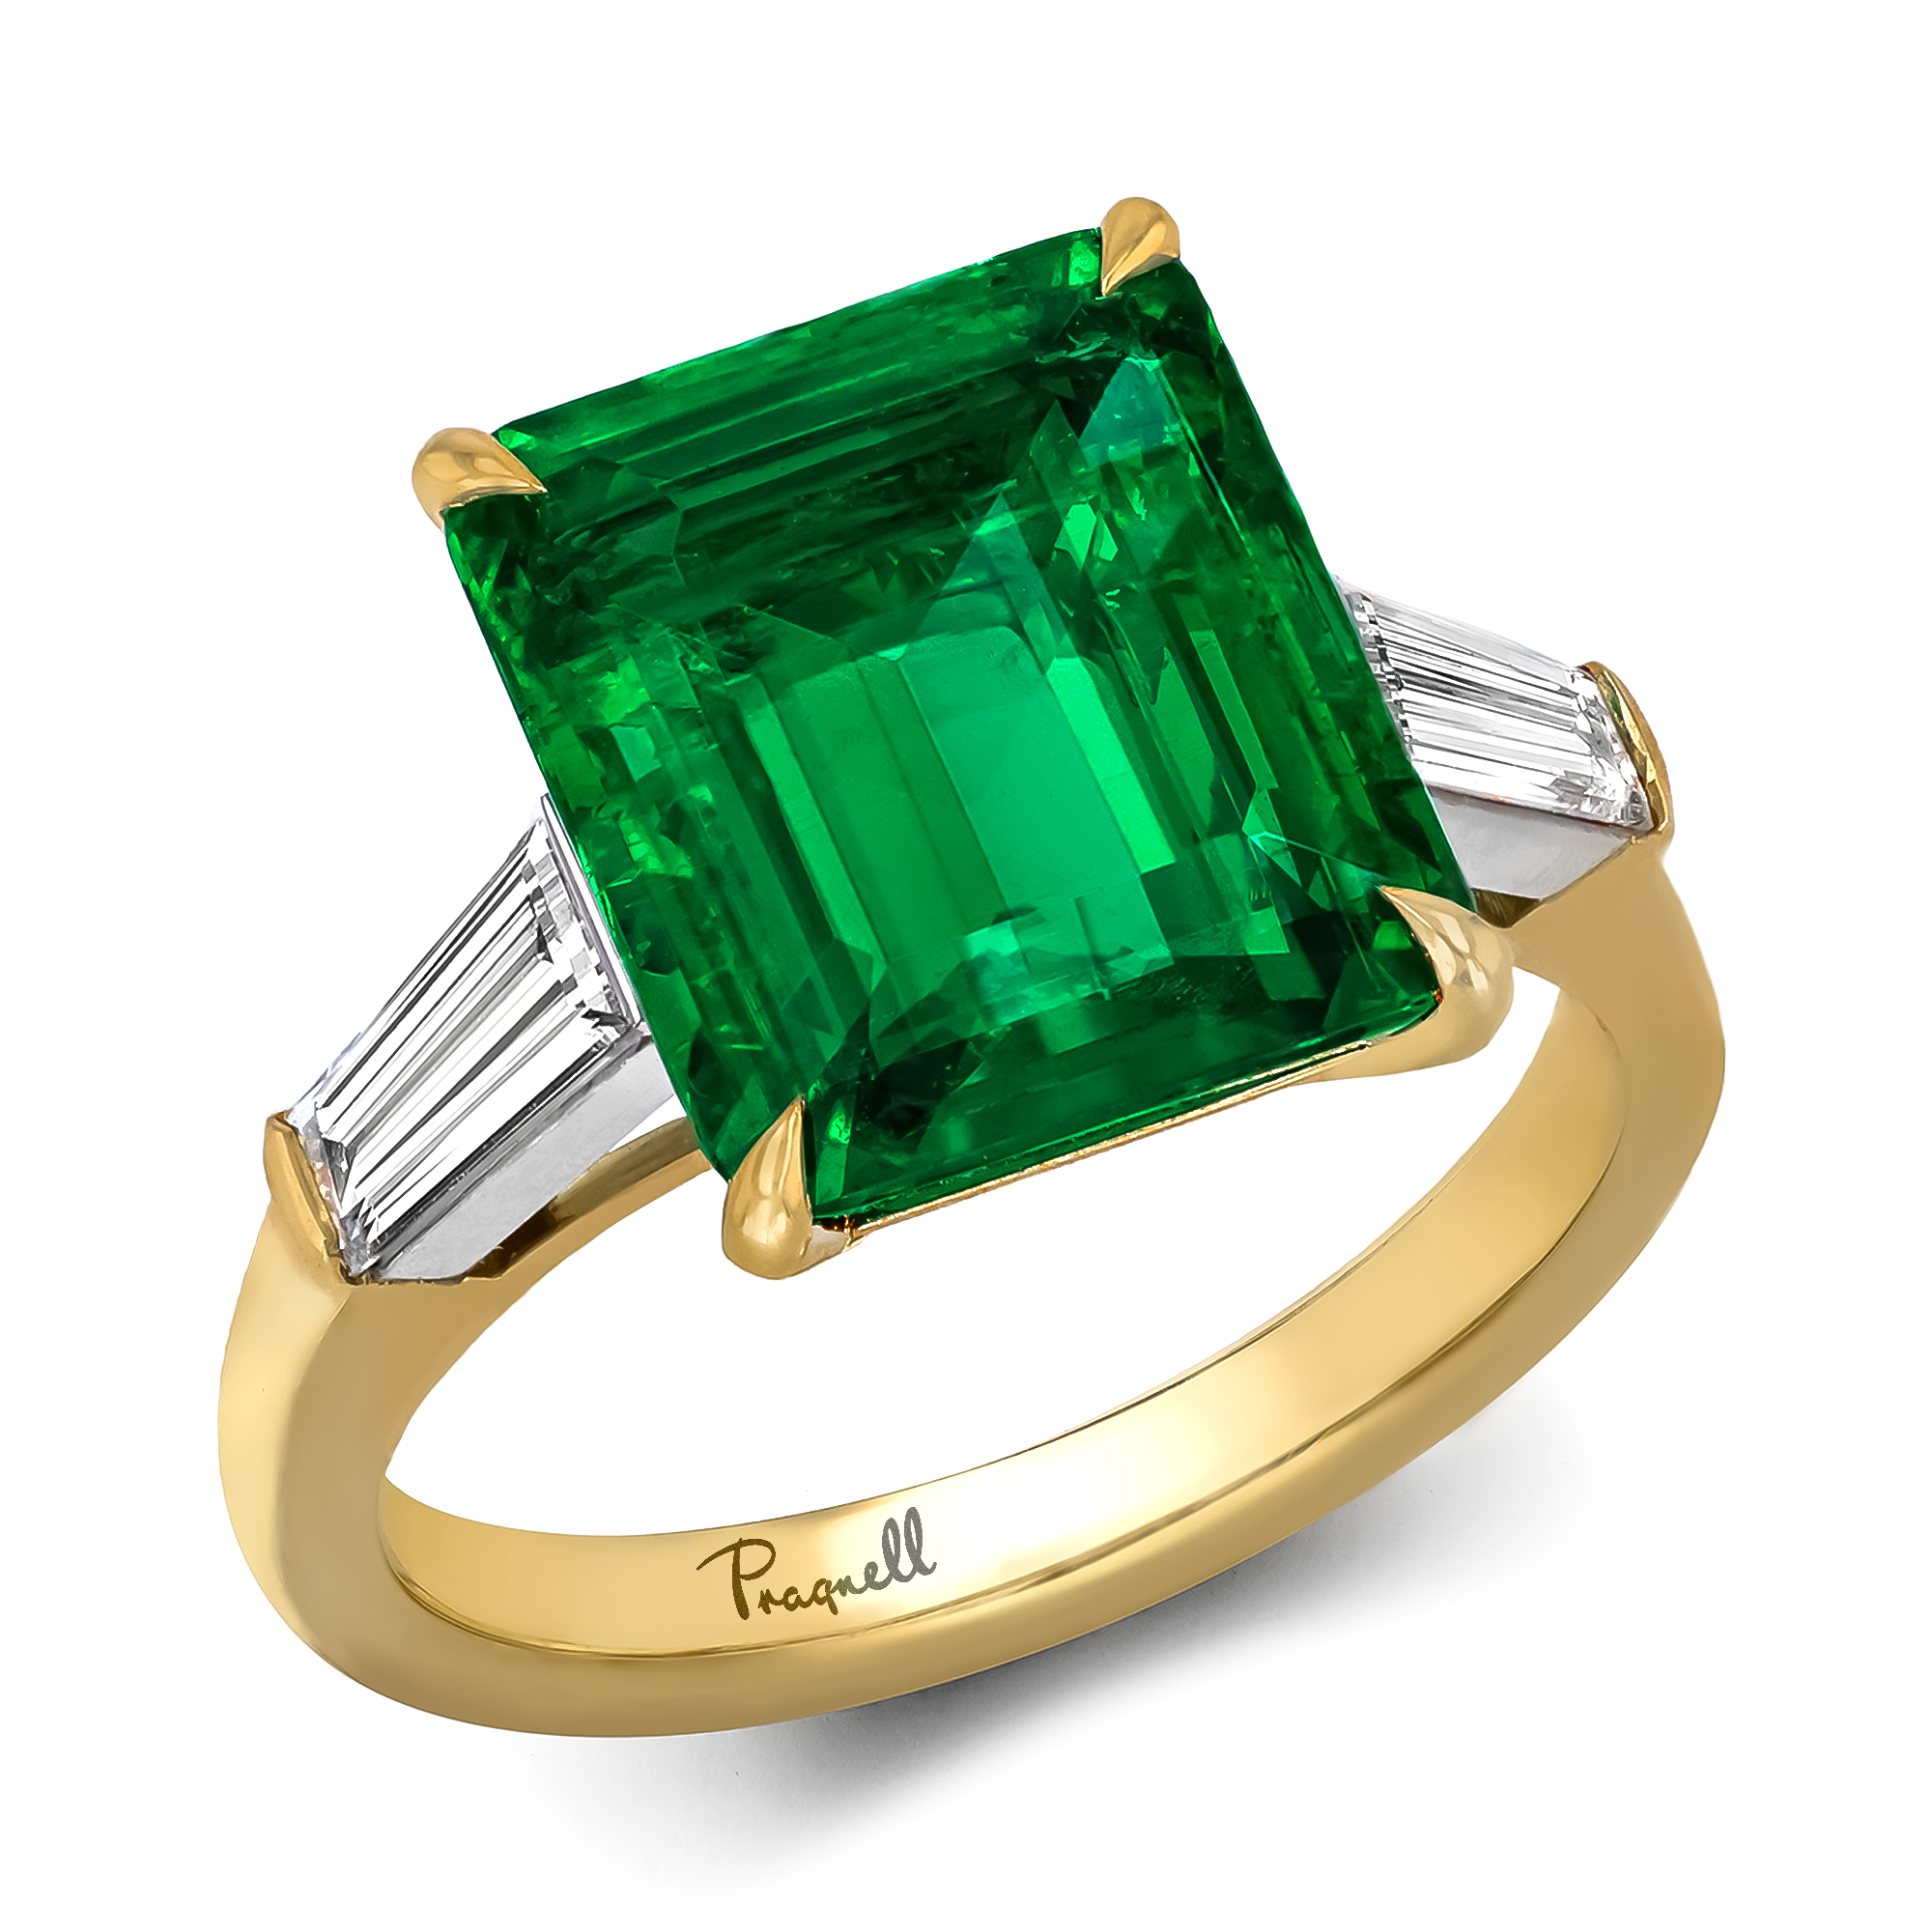 Masterpiece Regency 5.19ct Colombian Emerald and Diamond Ring Rectangular Step Cut, Claw Set_1